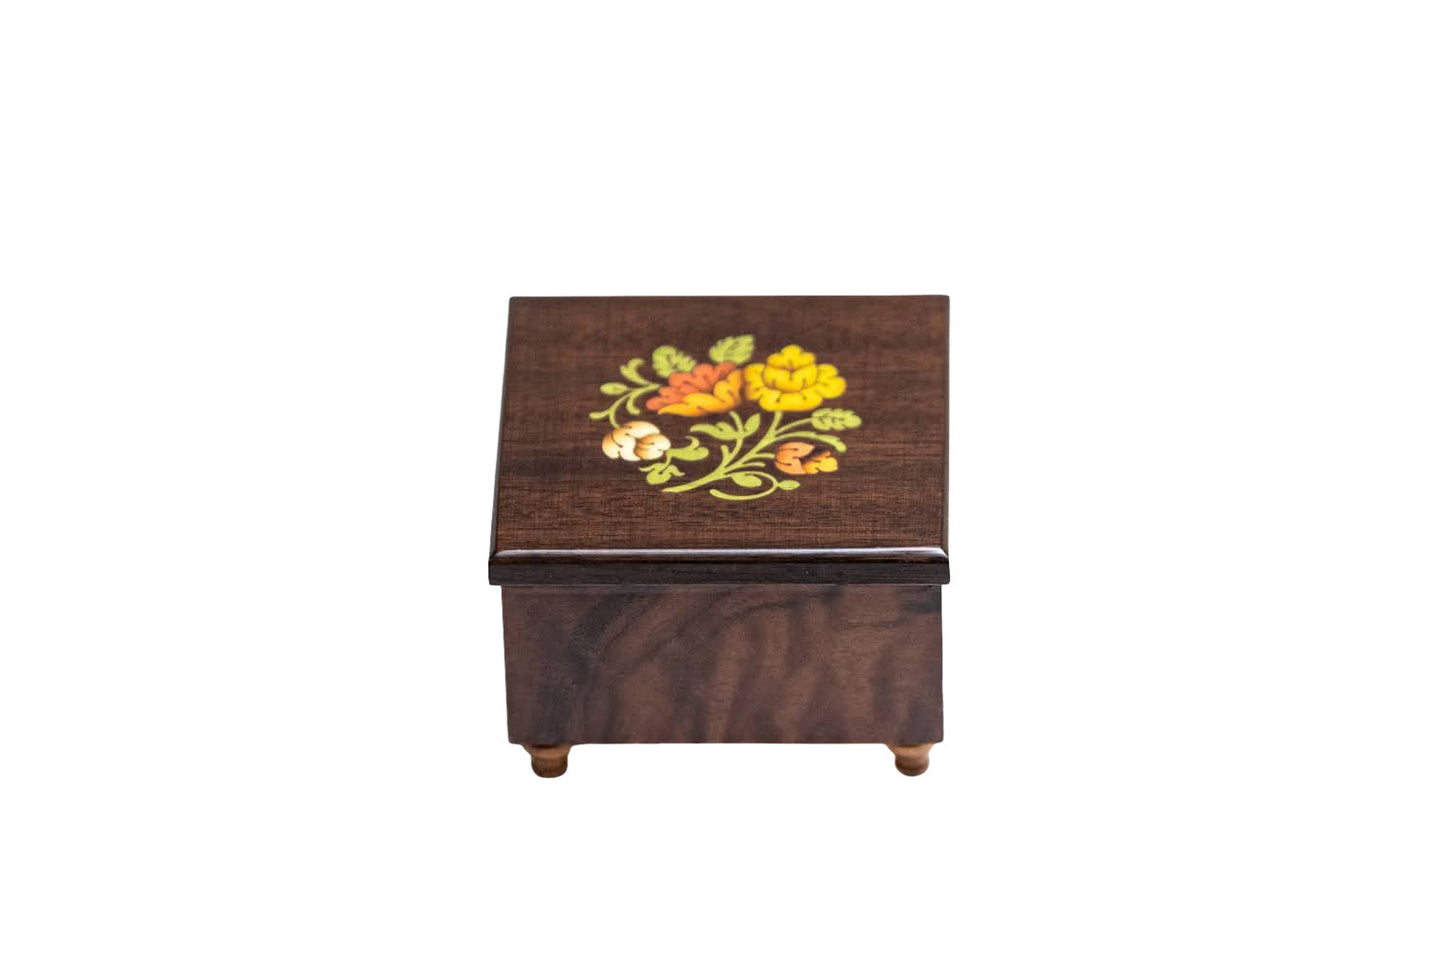 Sorrento Music Box Brown Floral in Matte finish